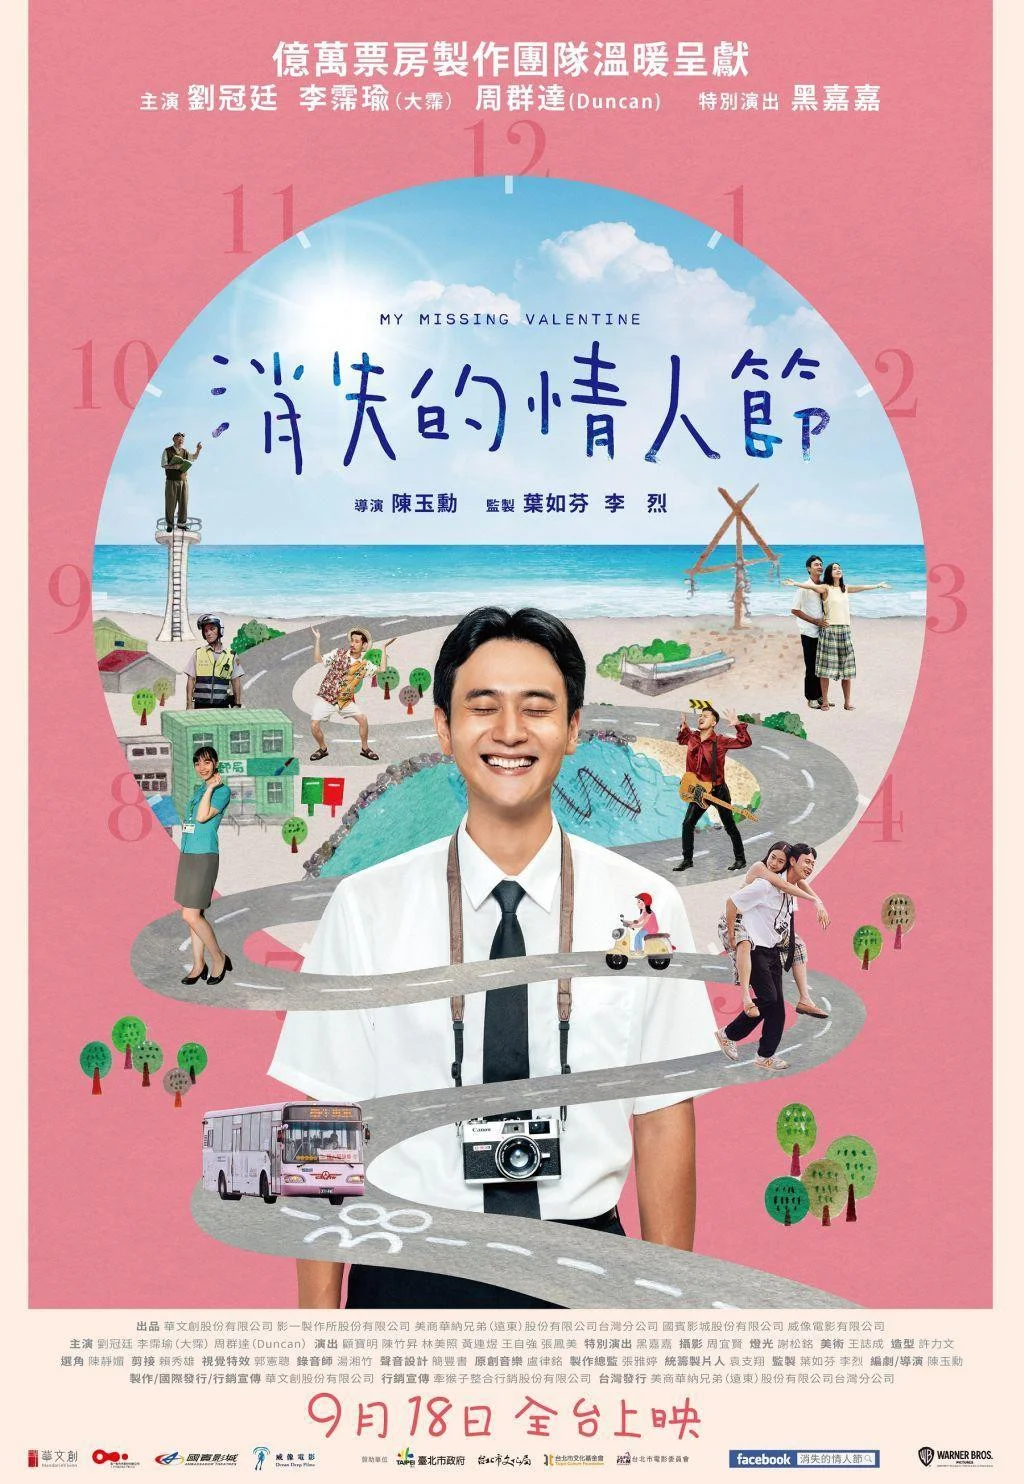 Japan will remake Taiwanese movie "My Missing Valentine", it will be released in 2023